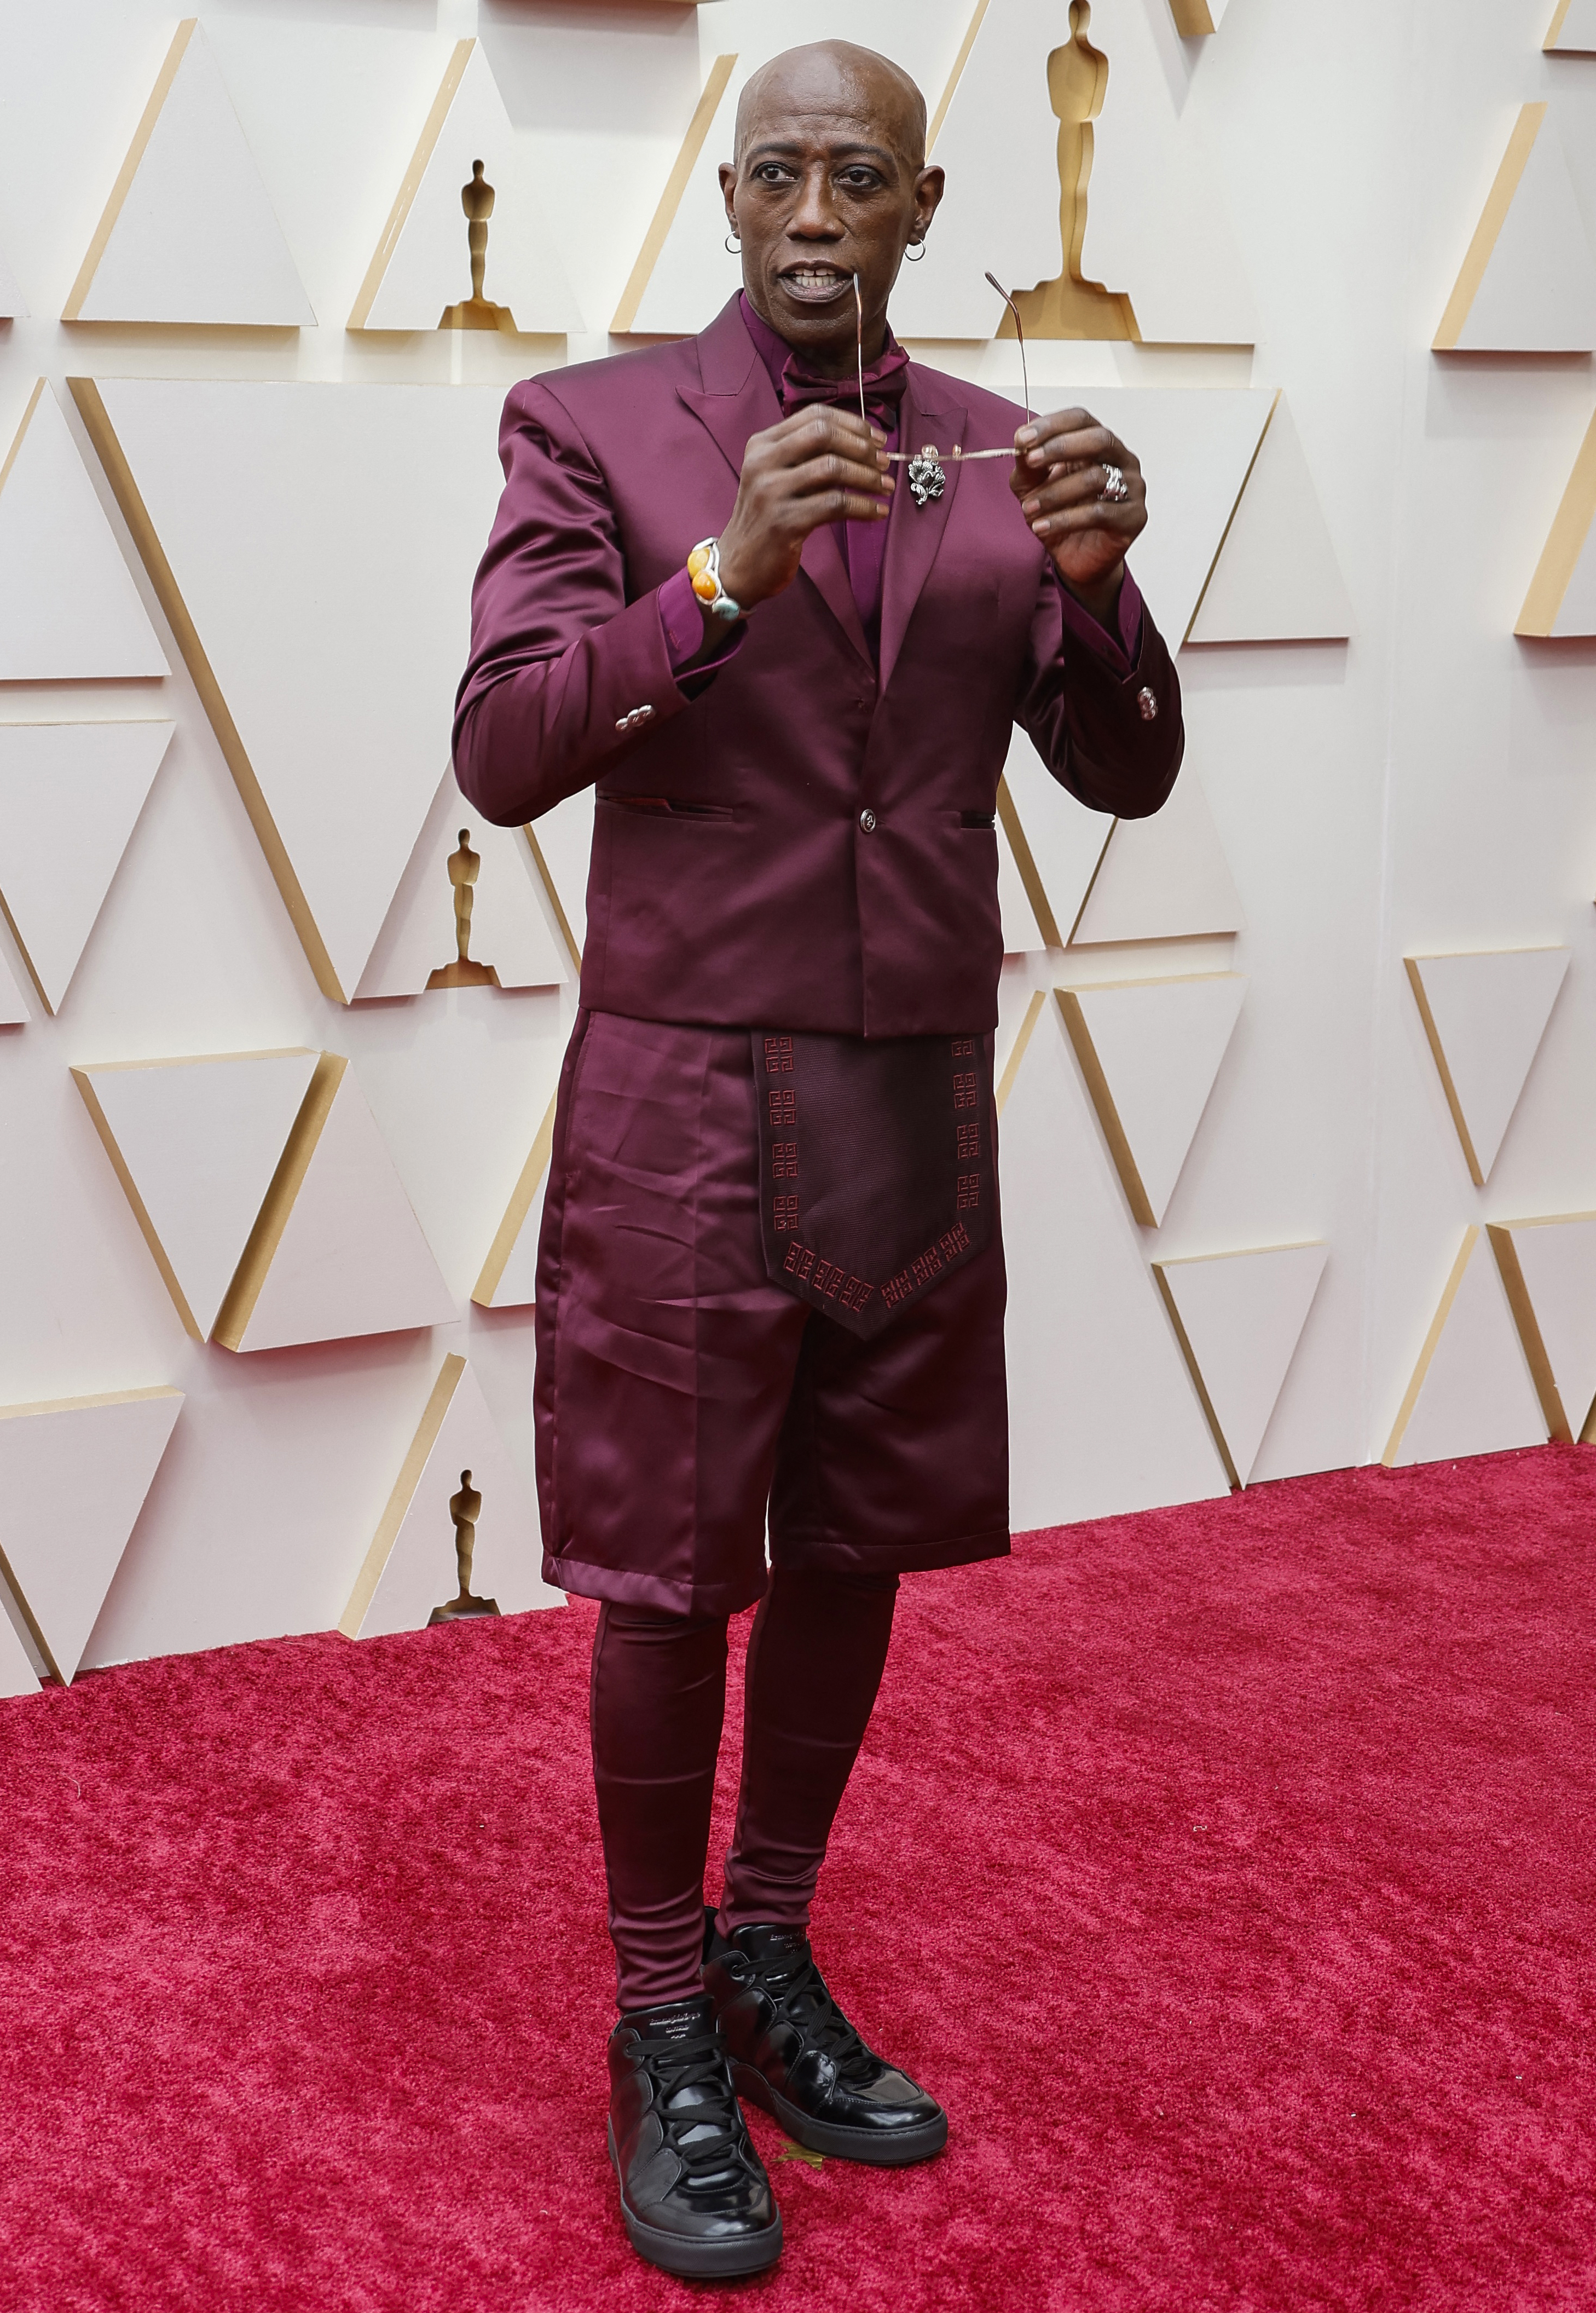 Actor Wesley Snipes poses on a red carpet holding a pair of sunglasses near his face, he is wearing a maroon ensemble and boots